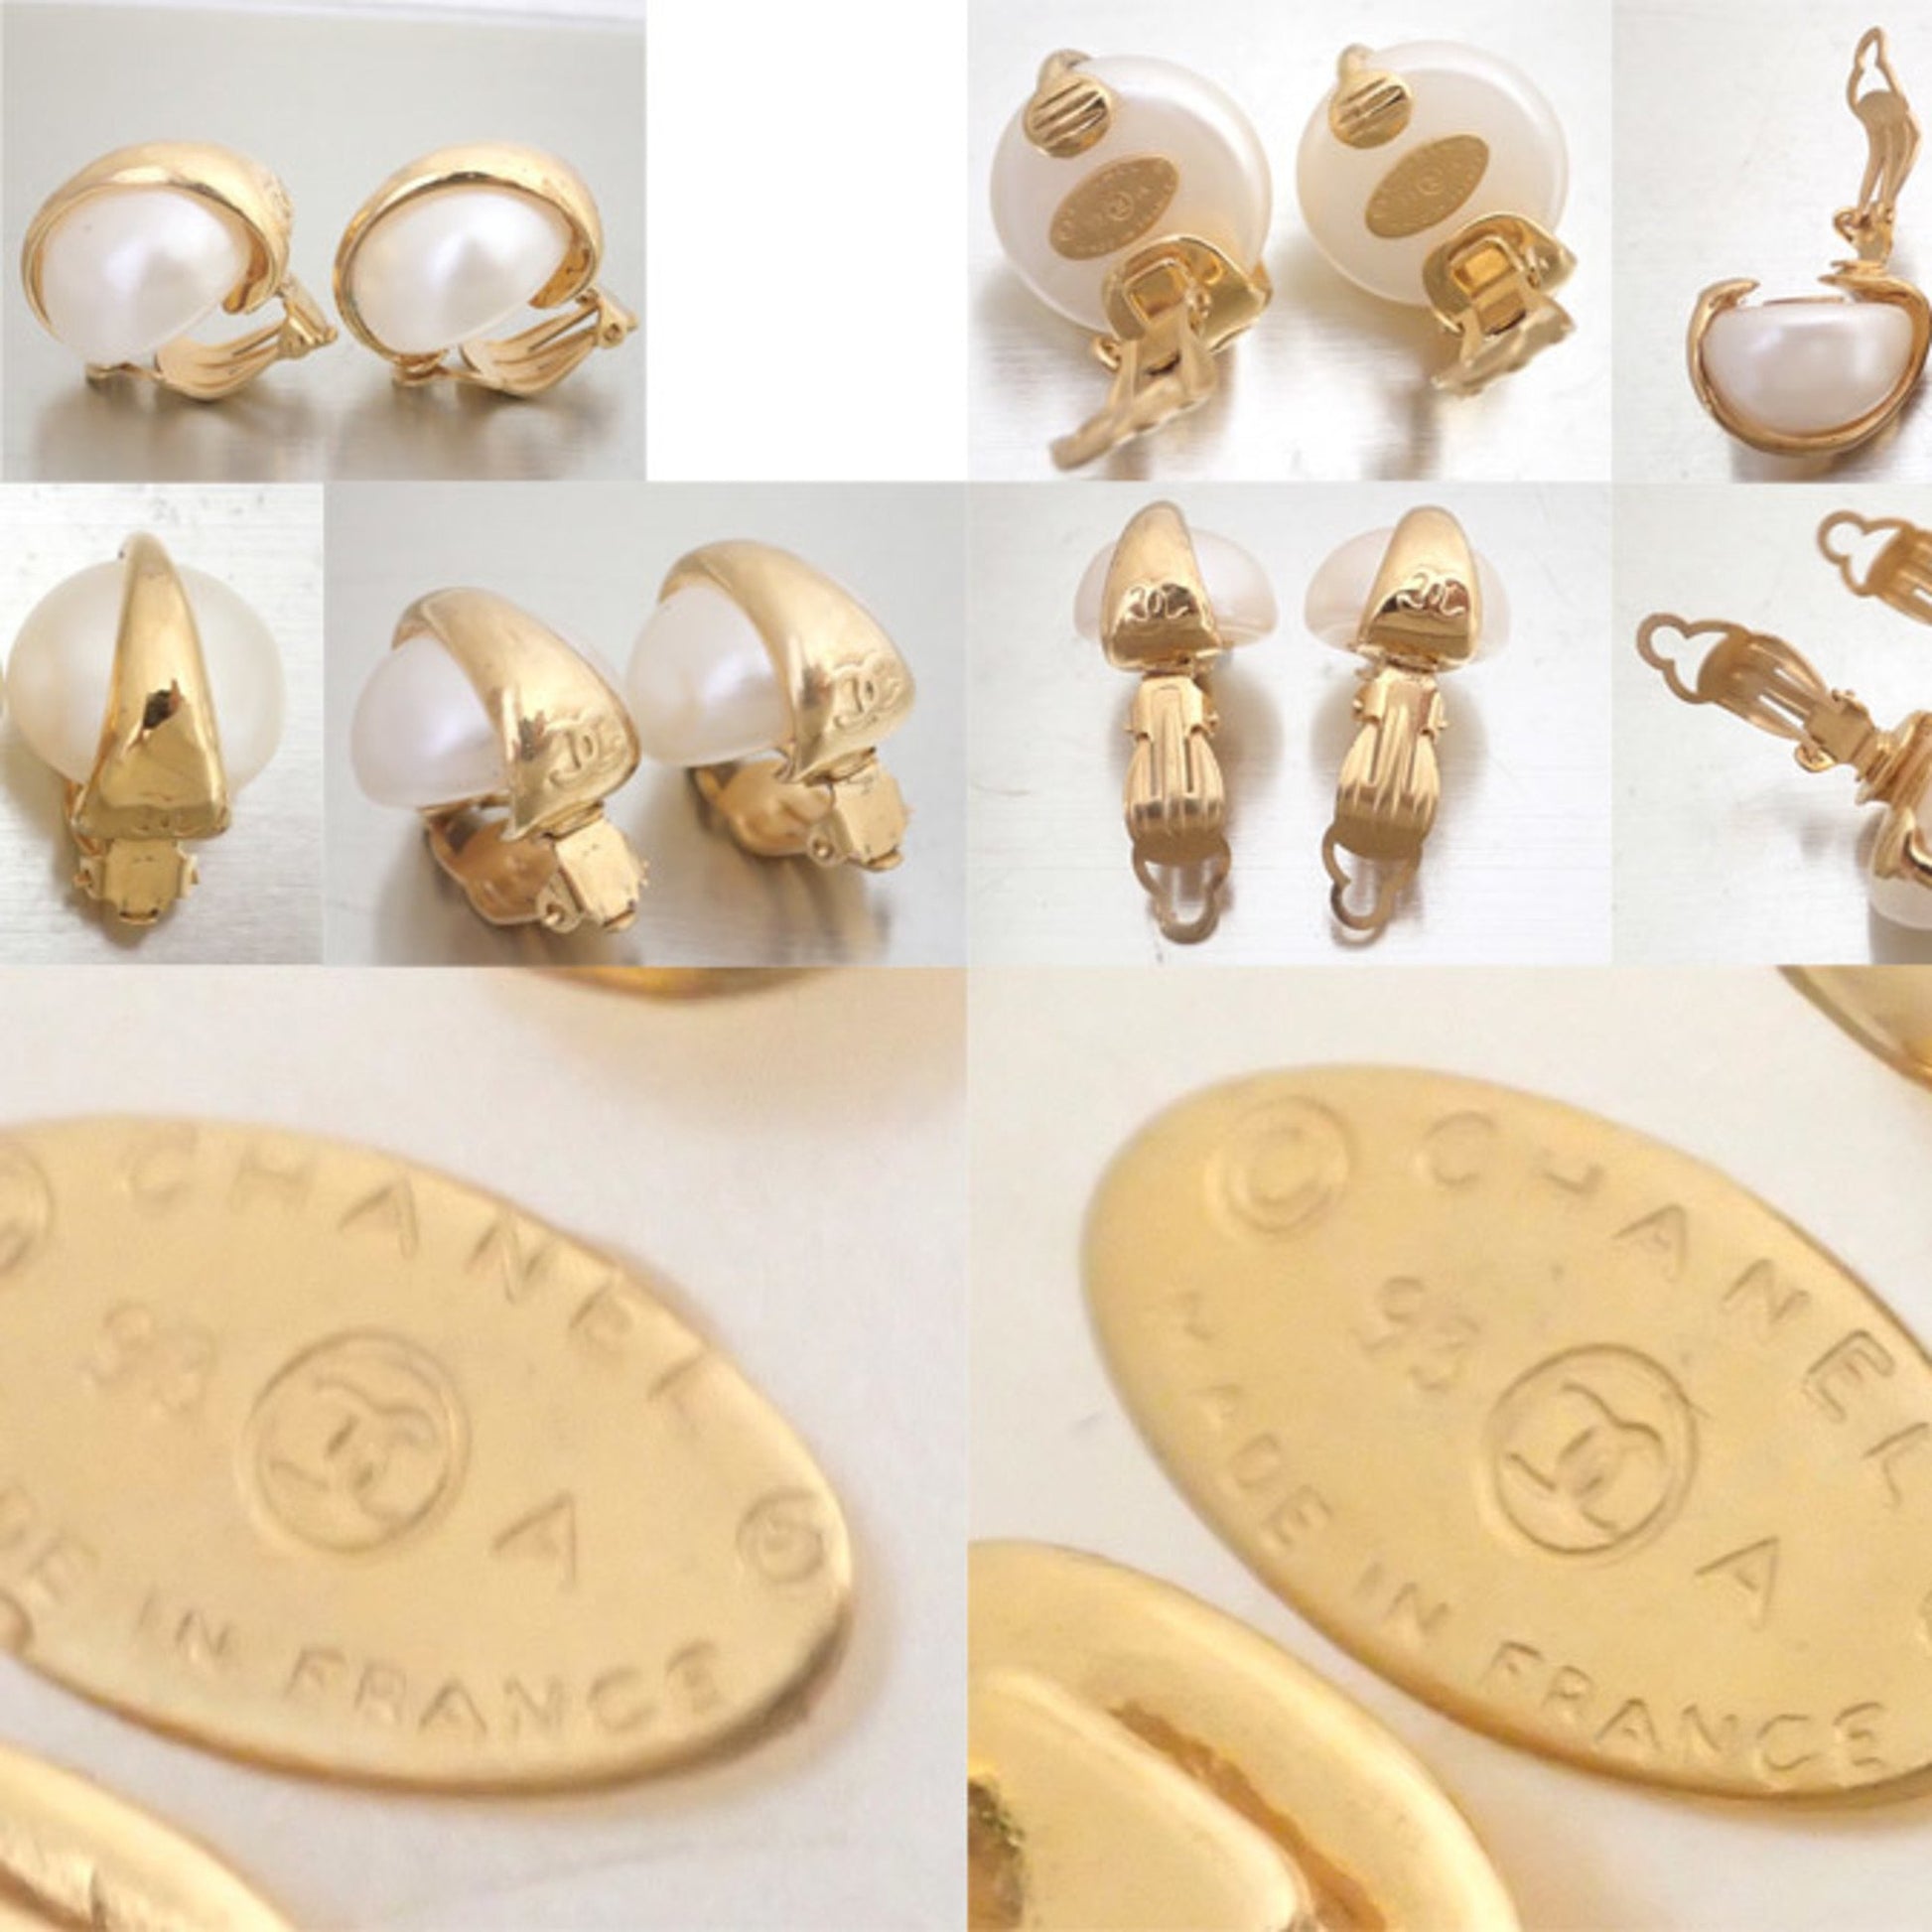 Chanel - Authenticated Earrings - Gold Plated Gold for Women, Good Condition